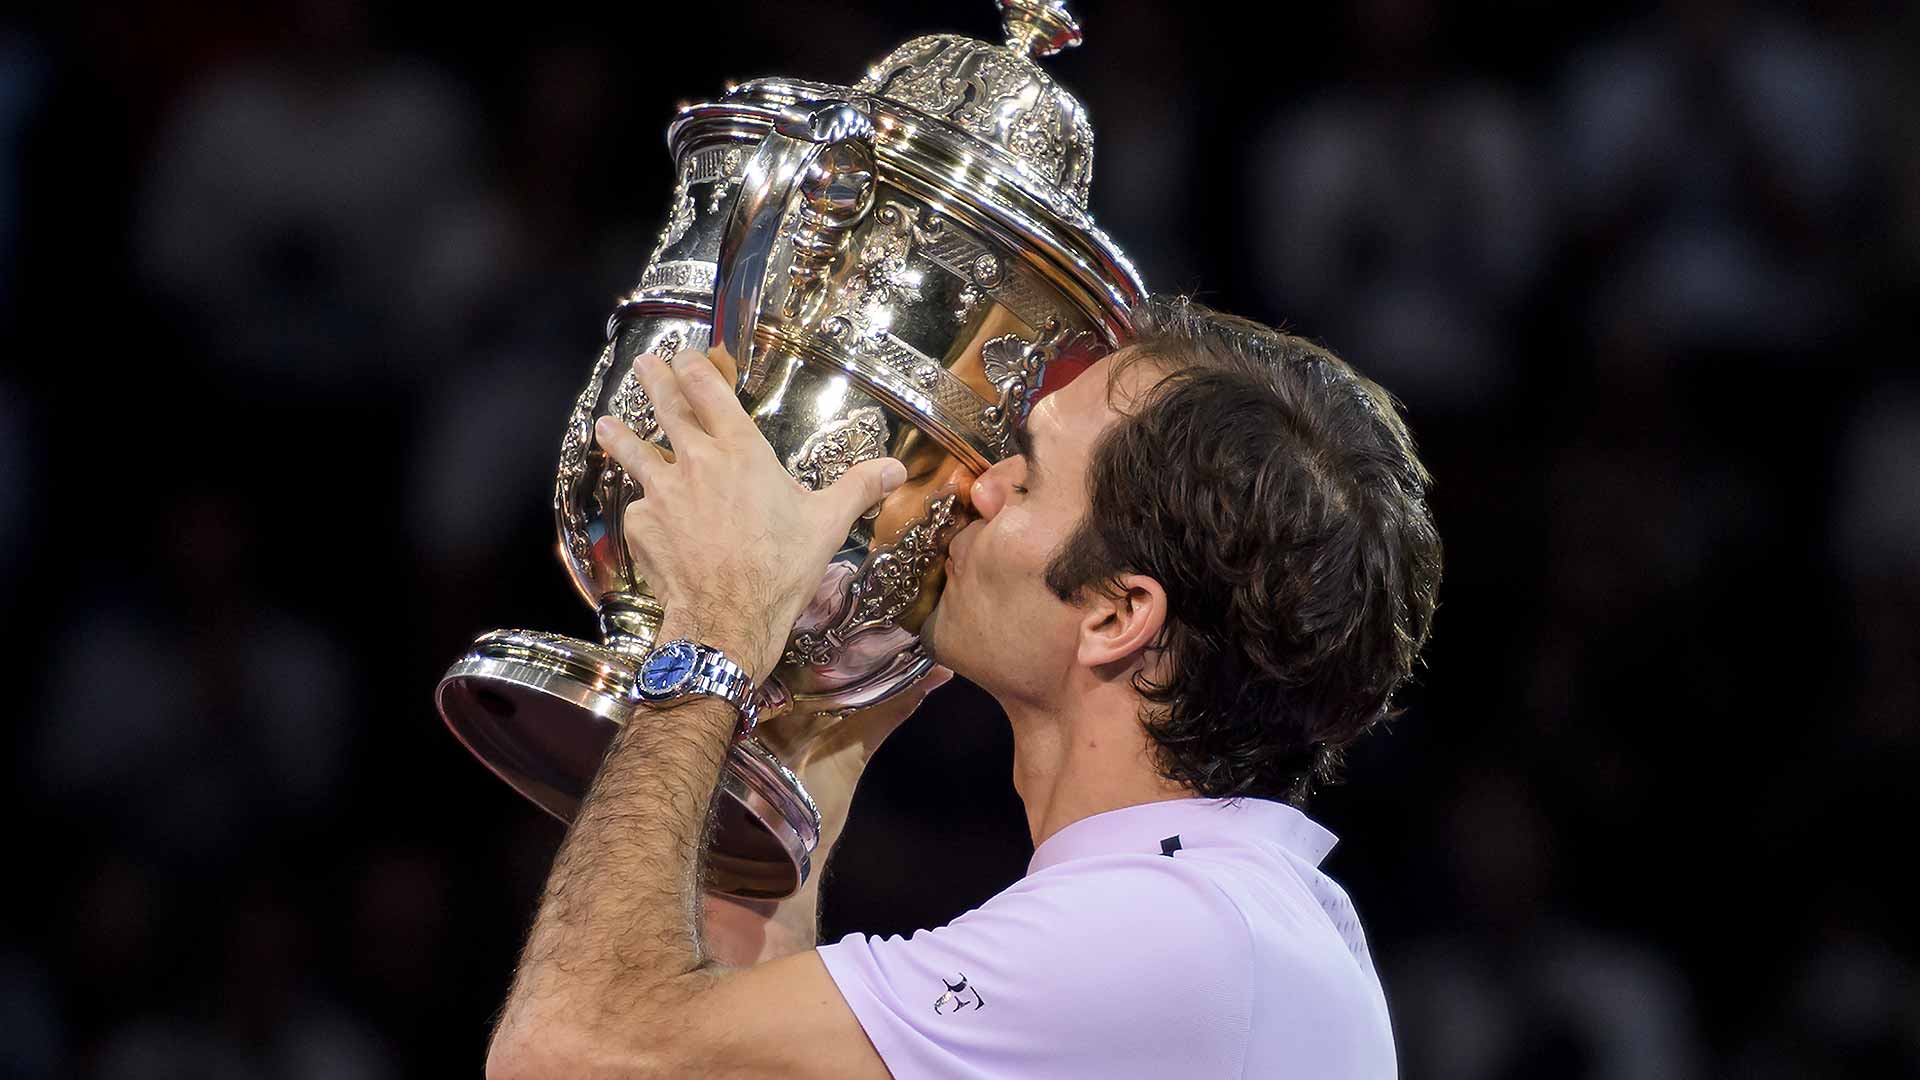 Roger Federer celebrates his eighth Basel title after defeating Juan Martin del Potro in the final.